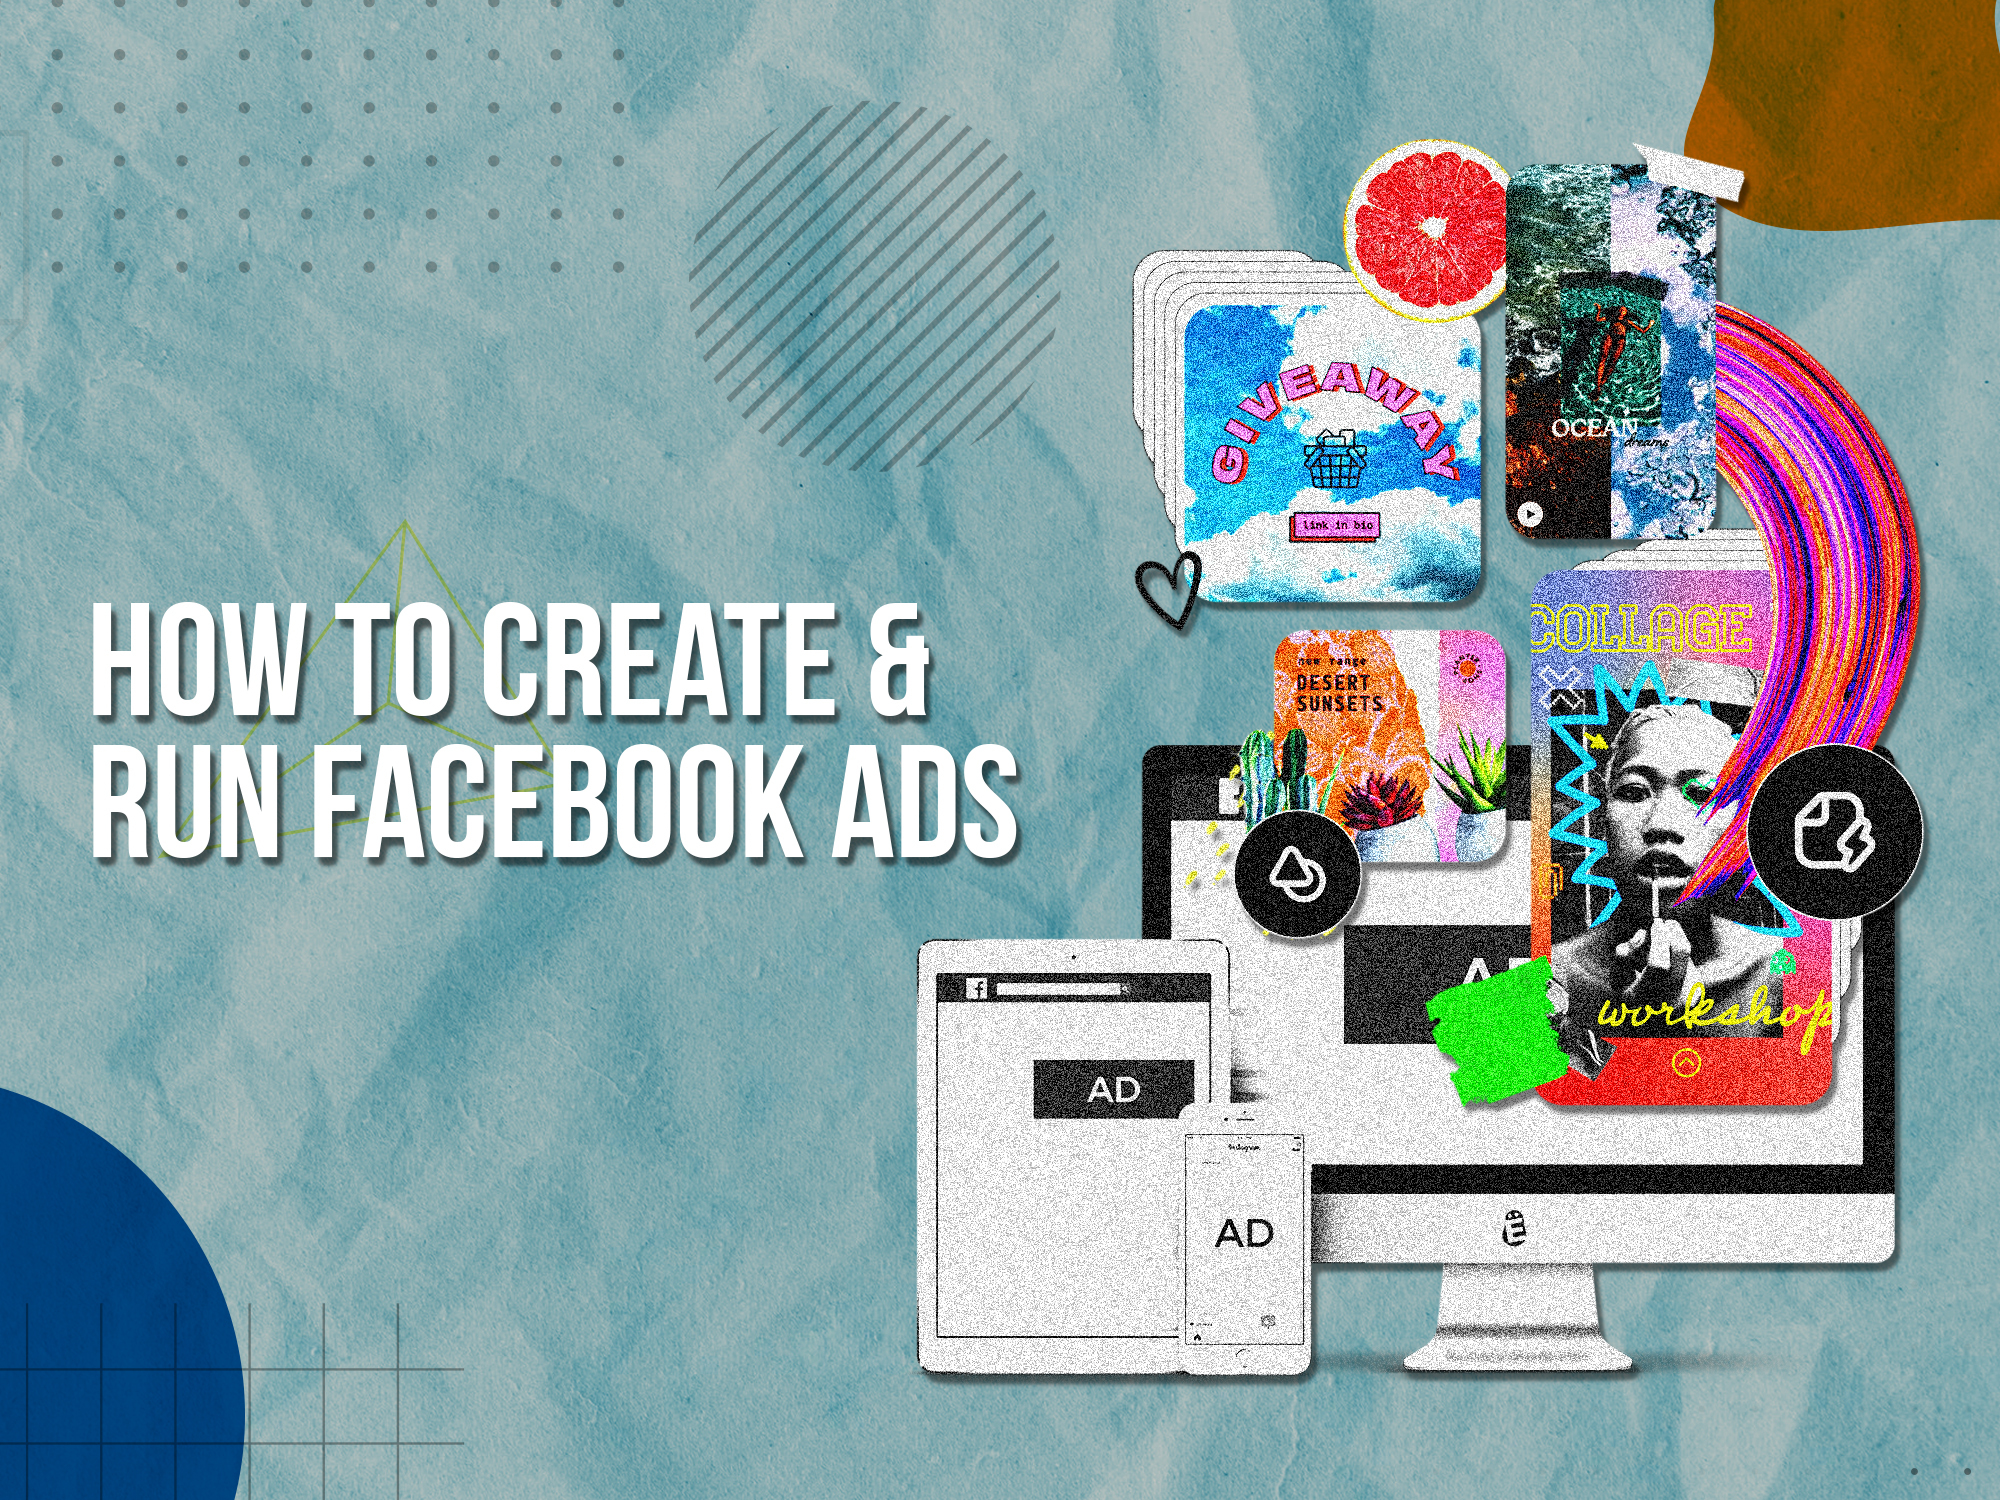 How to Create Facebook Ads: Step By Step Guide